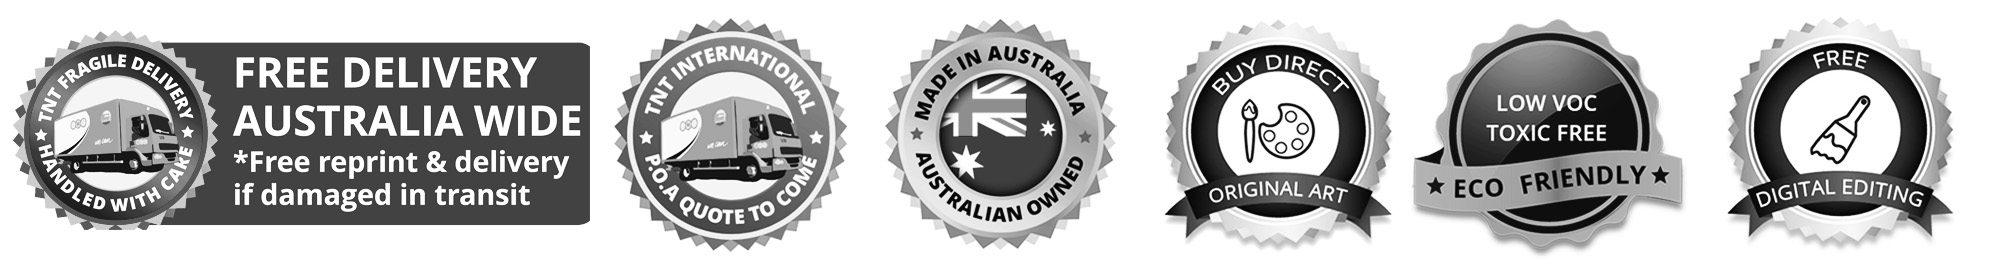 icons for free delivery Australia Wide | Australia Made | Free Digital Colour Editing | International Freight Priced POA | Low VOC Eco Friendly